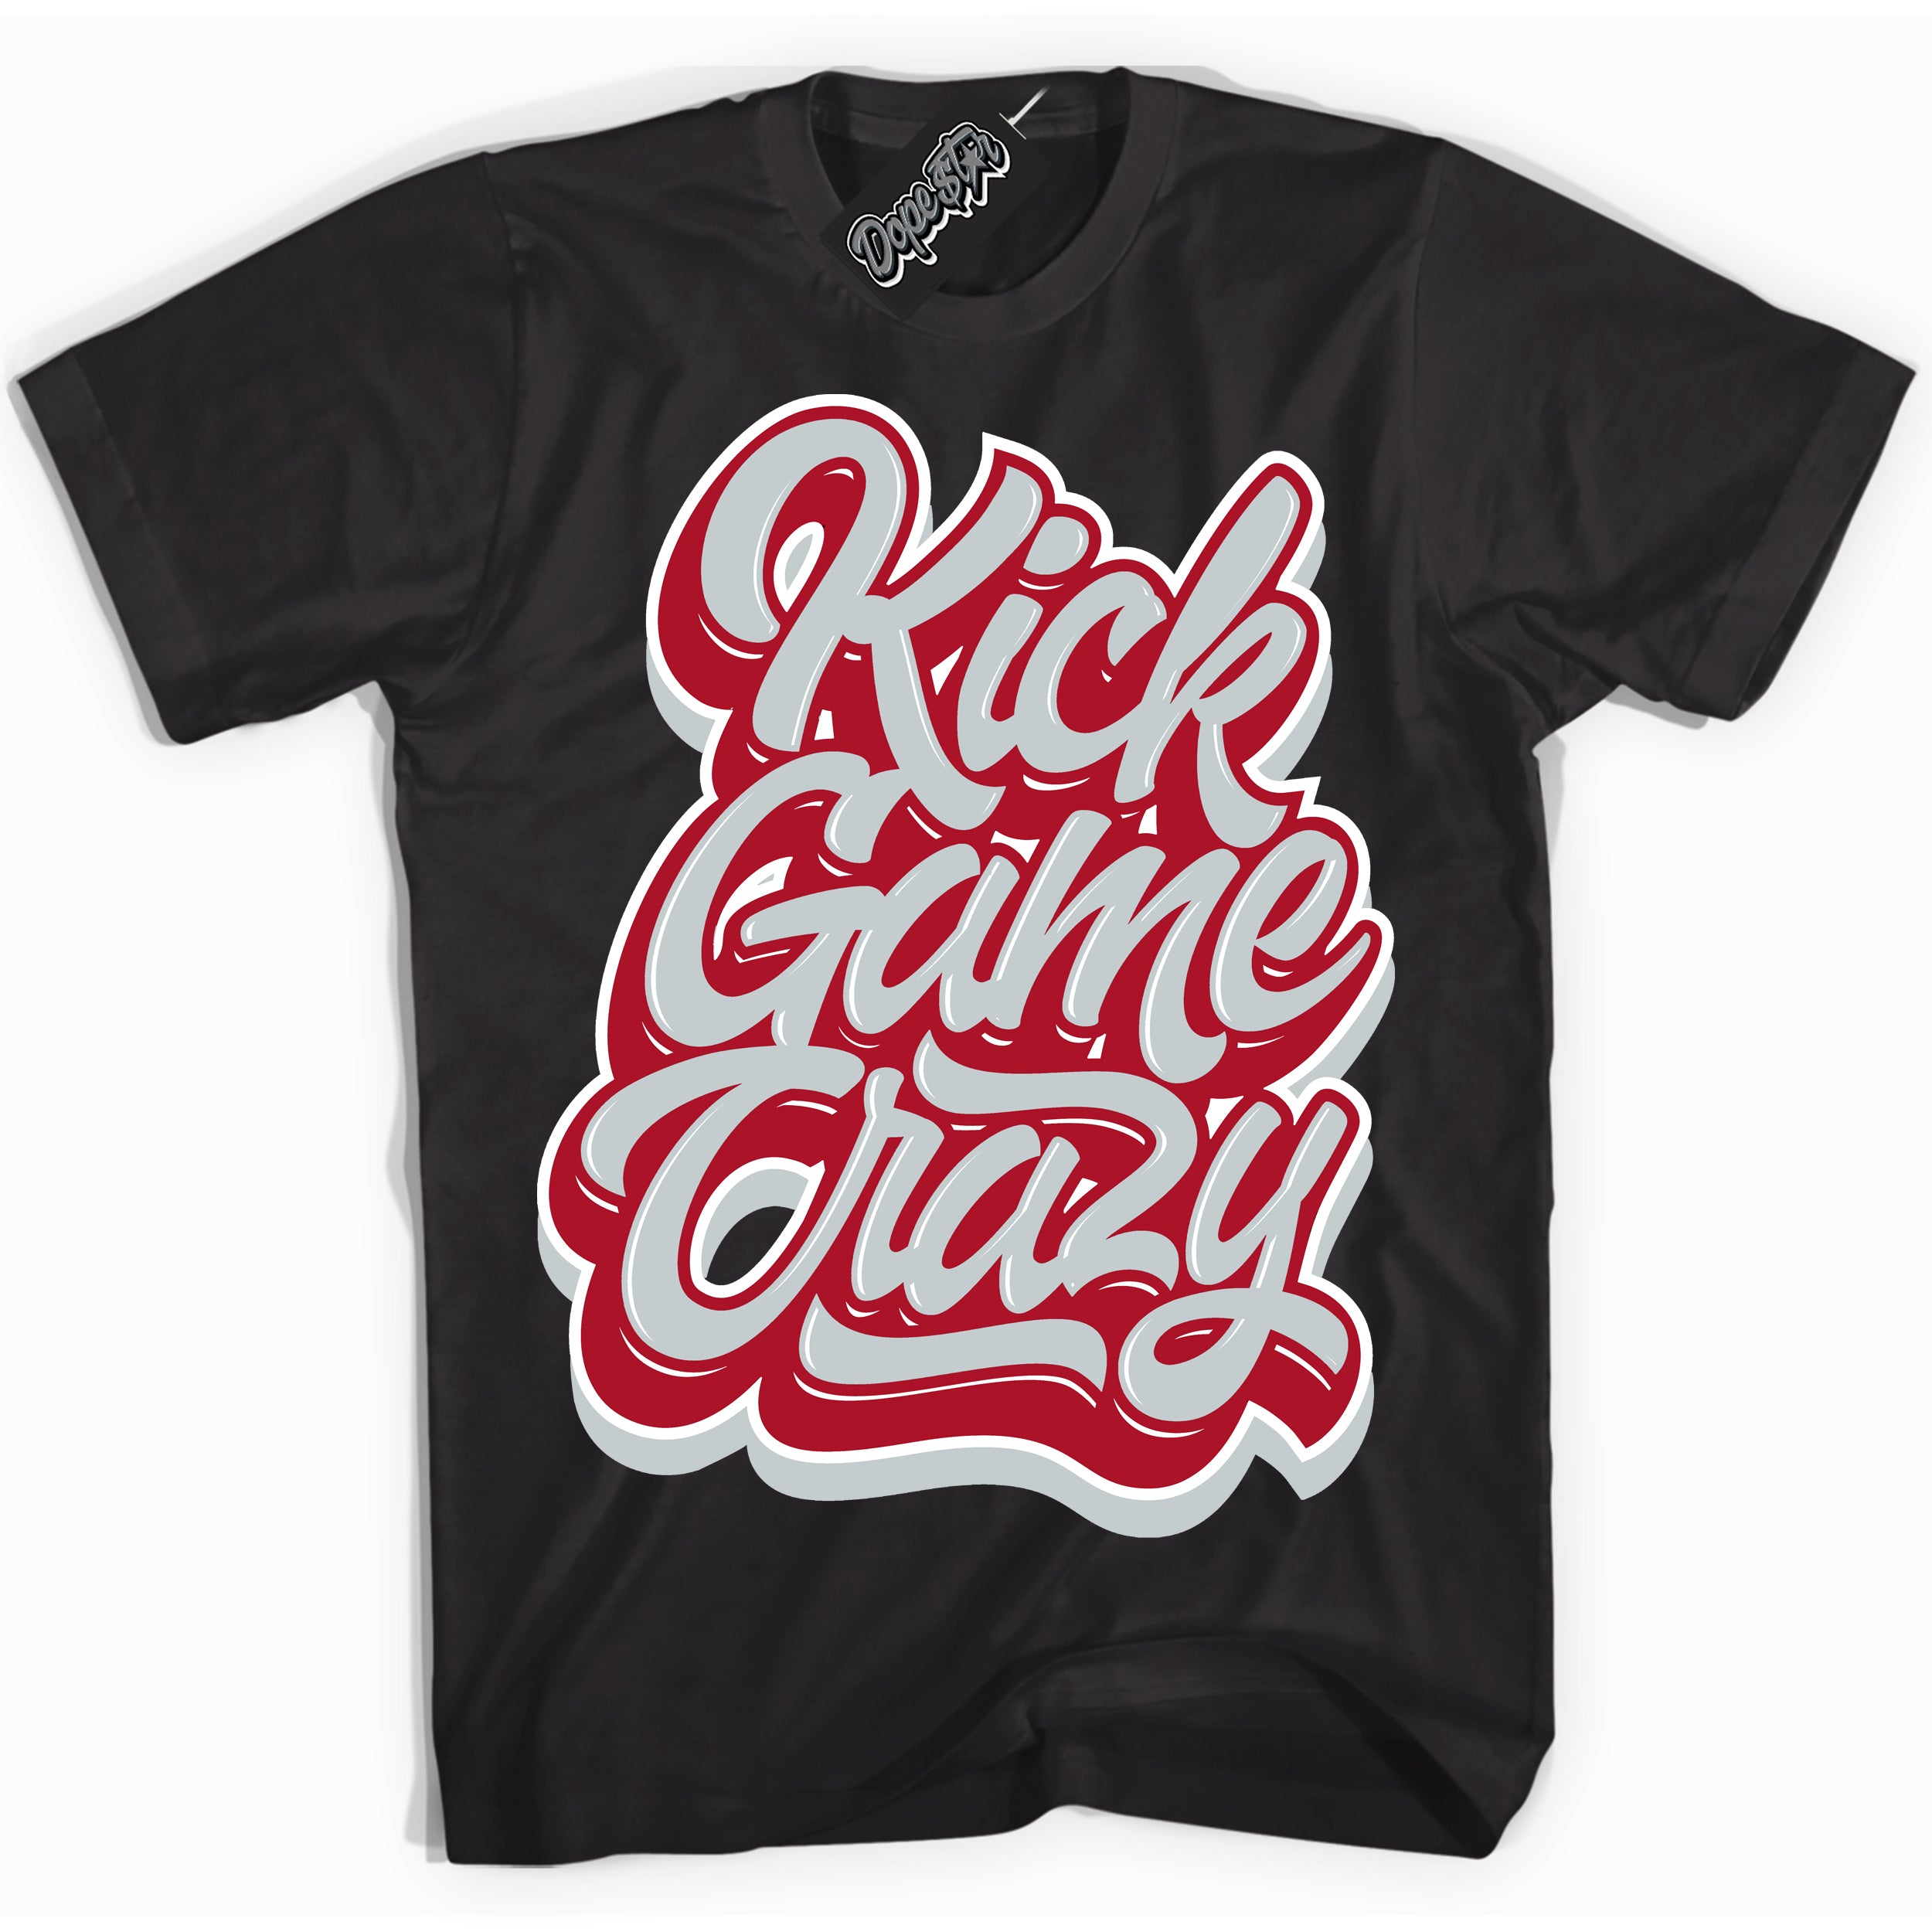 Cool Black Shirt with “ Kick Game Crazy” design that perfectly matches Reverse Ultraman Sneakers.